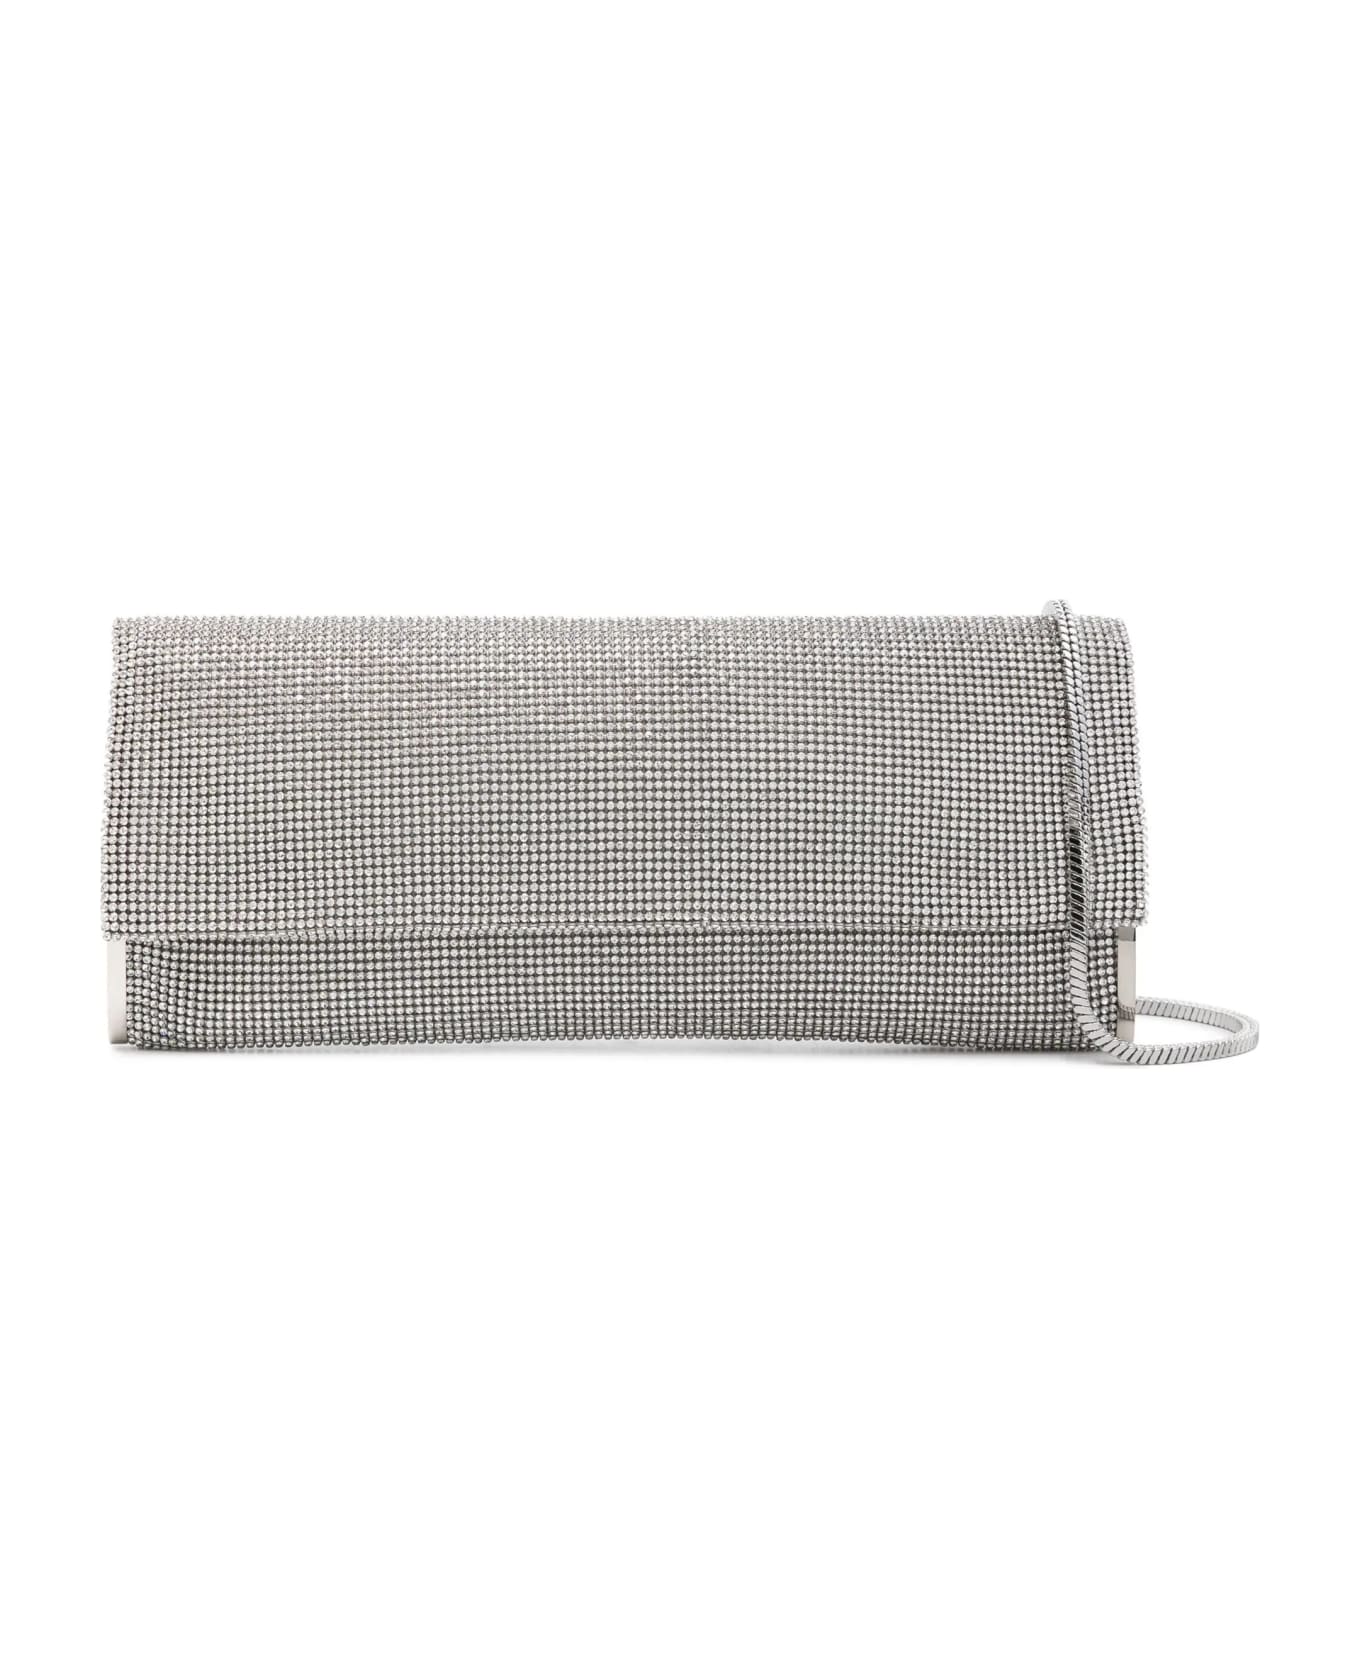 Benedetta Bruzziches Kate Crystal Bag Crystal On Silver - Silver クラッチバッグ